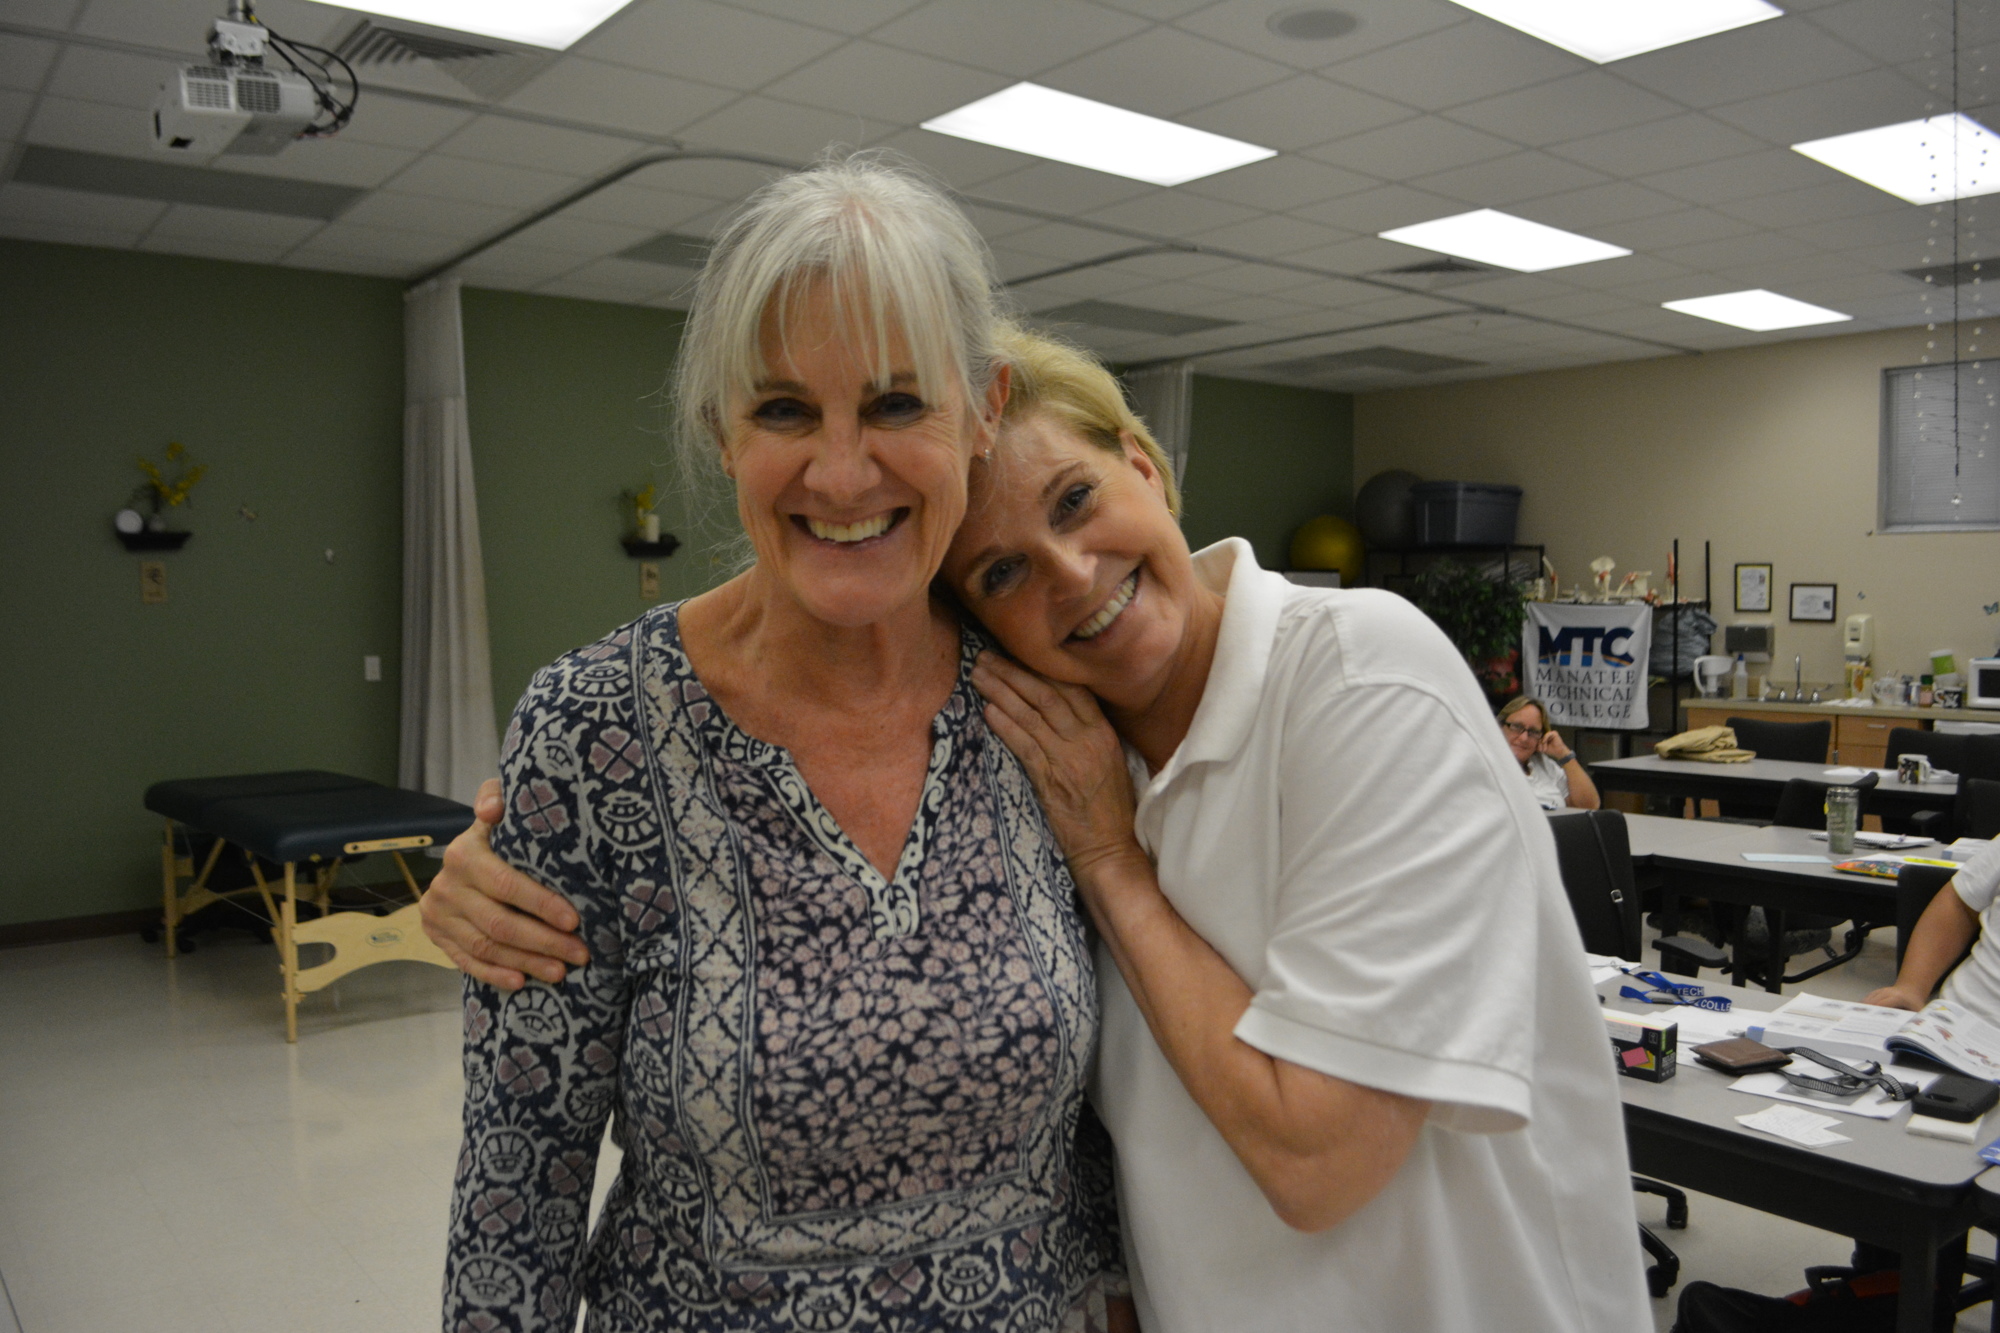 MTC instructor Nancie Yonker is gifted according to her 59-year-old student, Central Park's Kelli Healy.